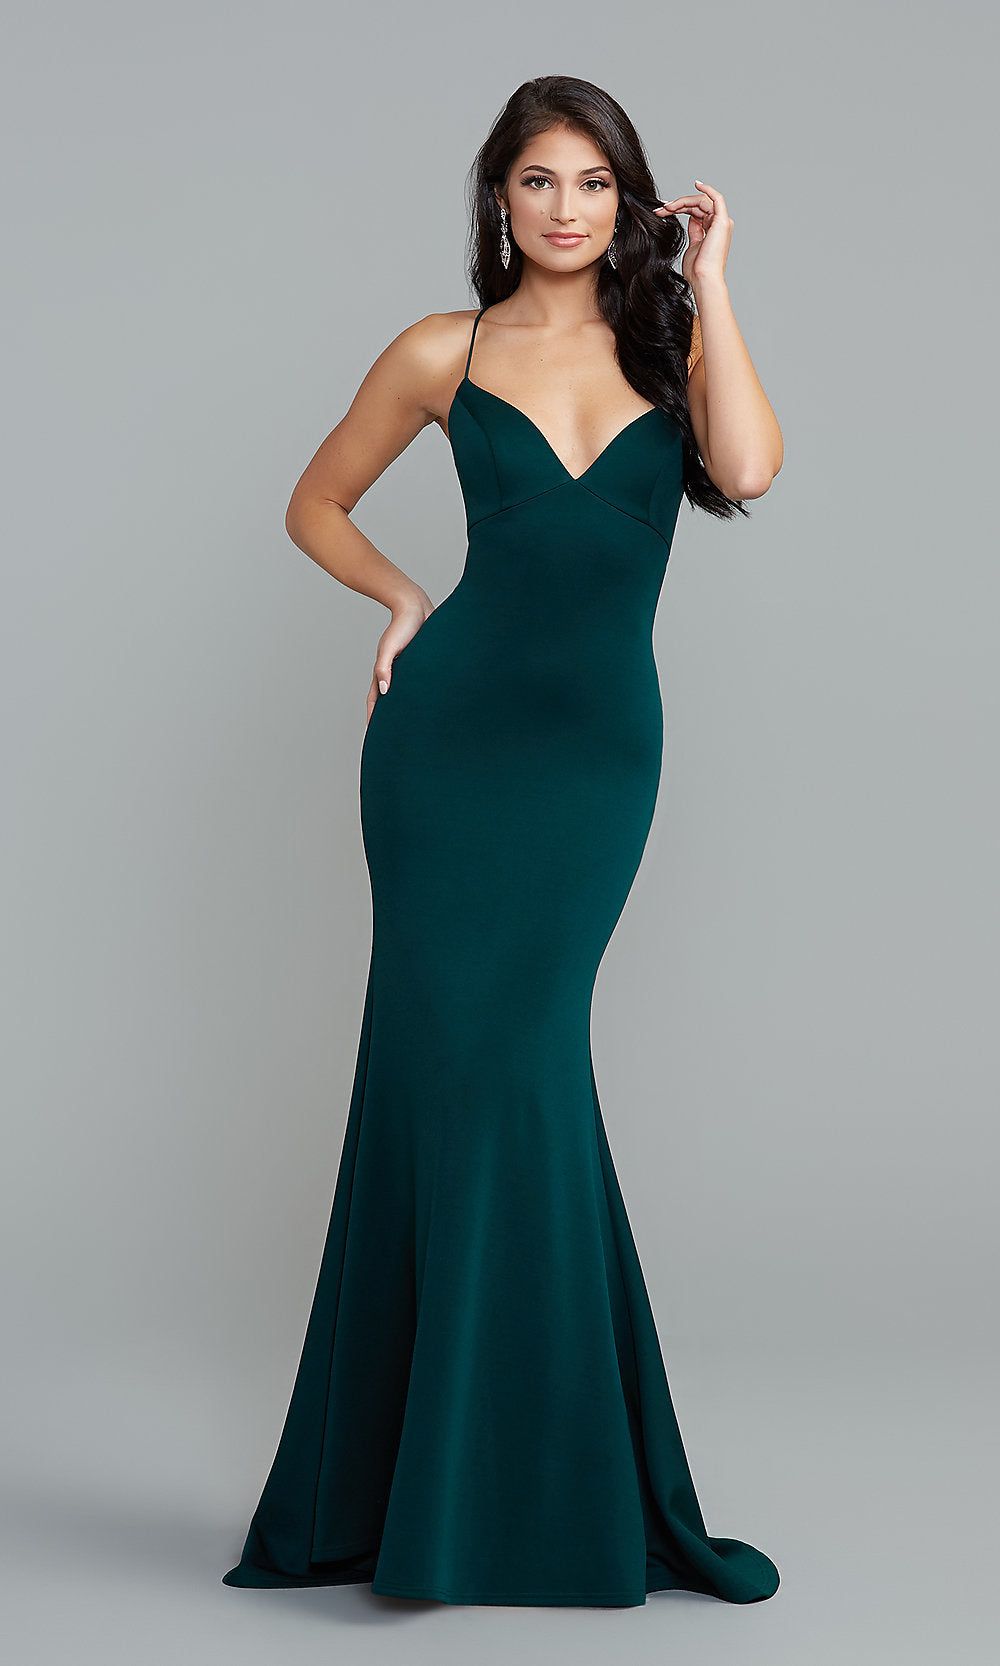 Forest Strappy-Back Long Prom Dress with Empire Waist